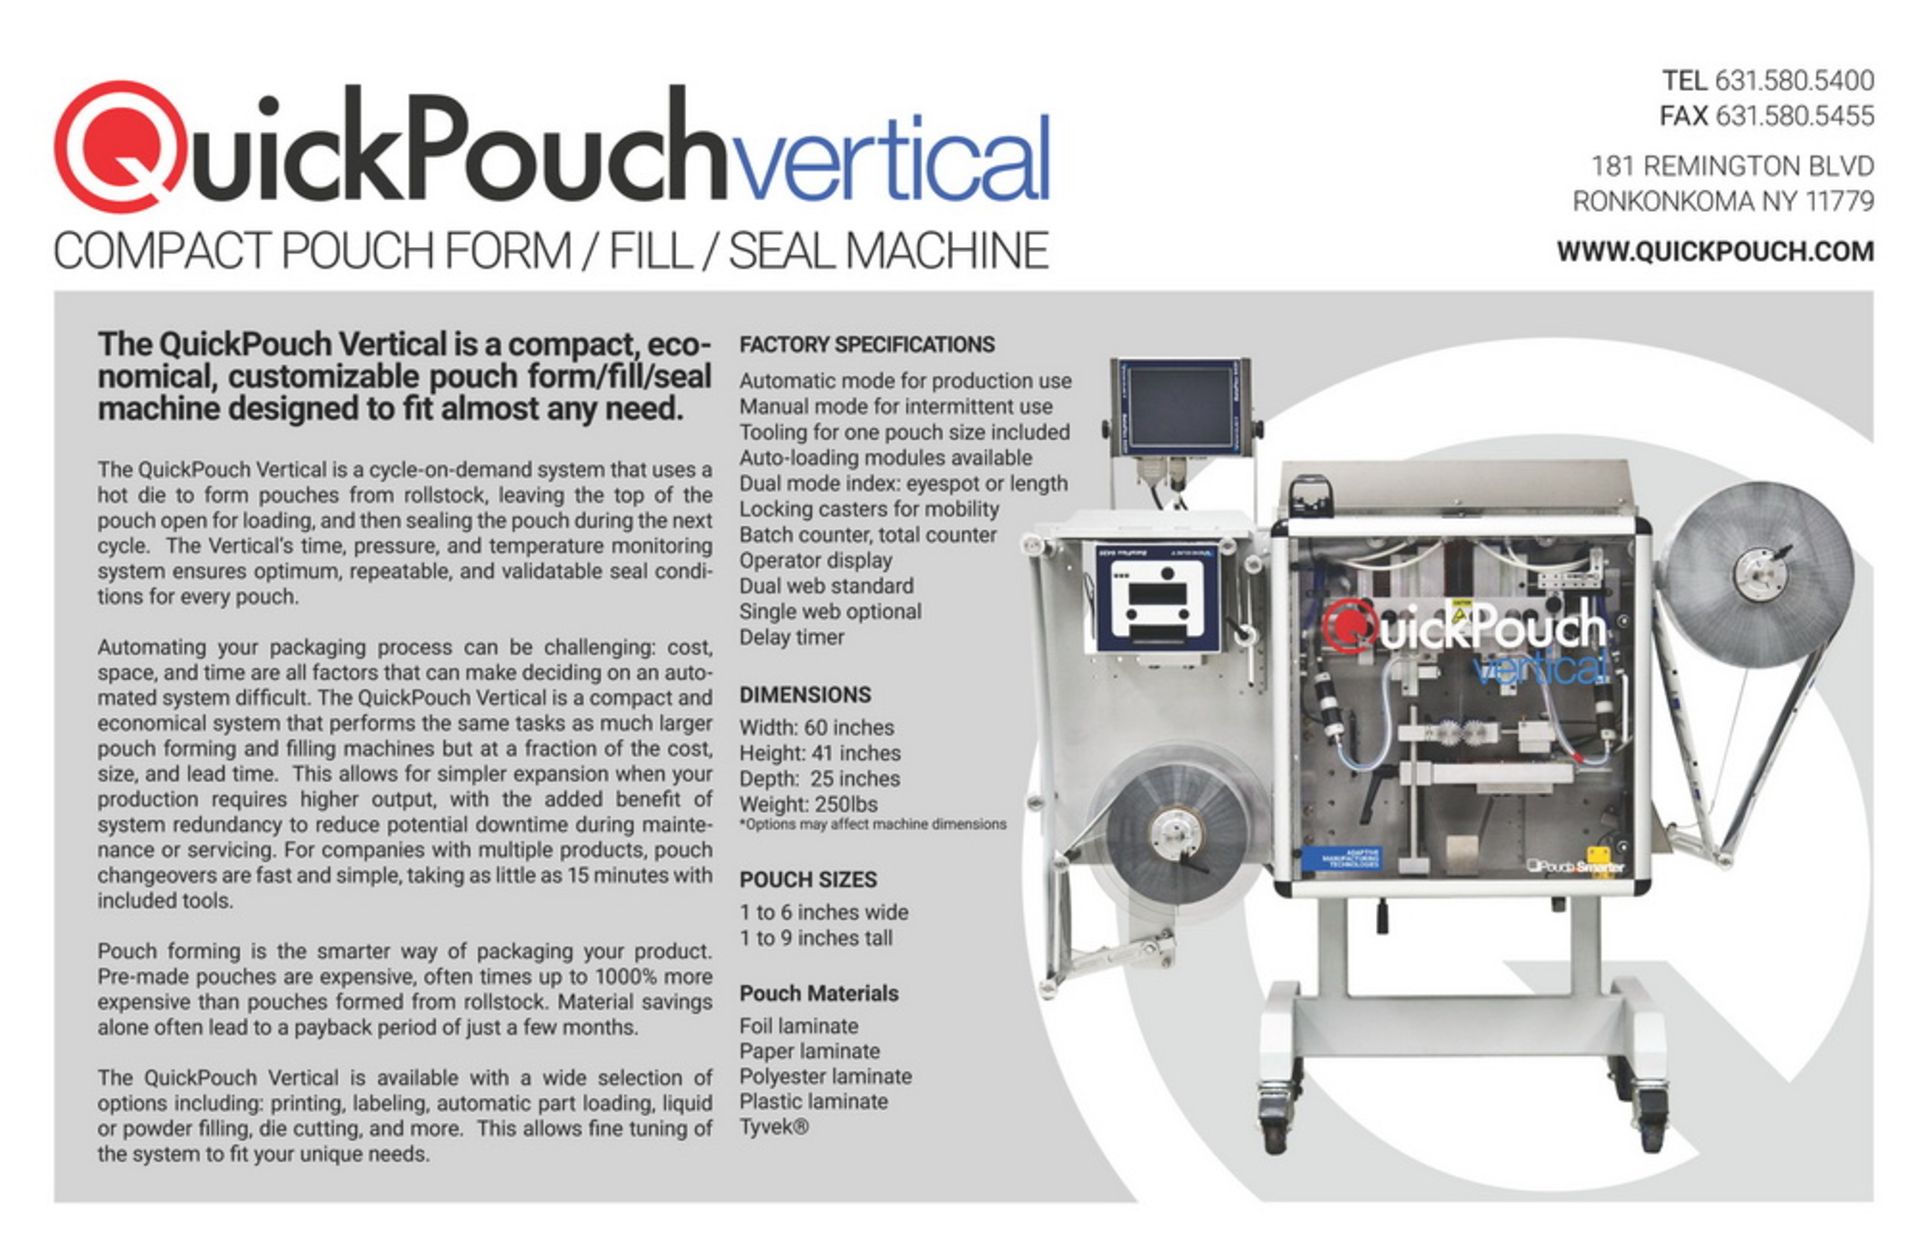 Quick Pouch Vertical Compact Pouch Form/Fill/Seal Machine, new 2011 - Image 11 of 11